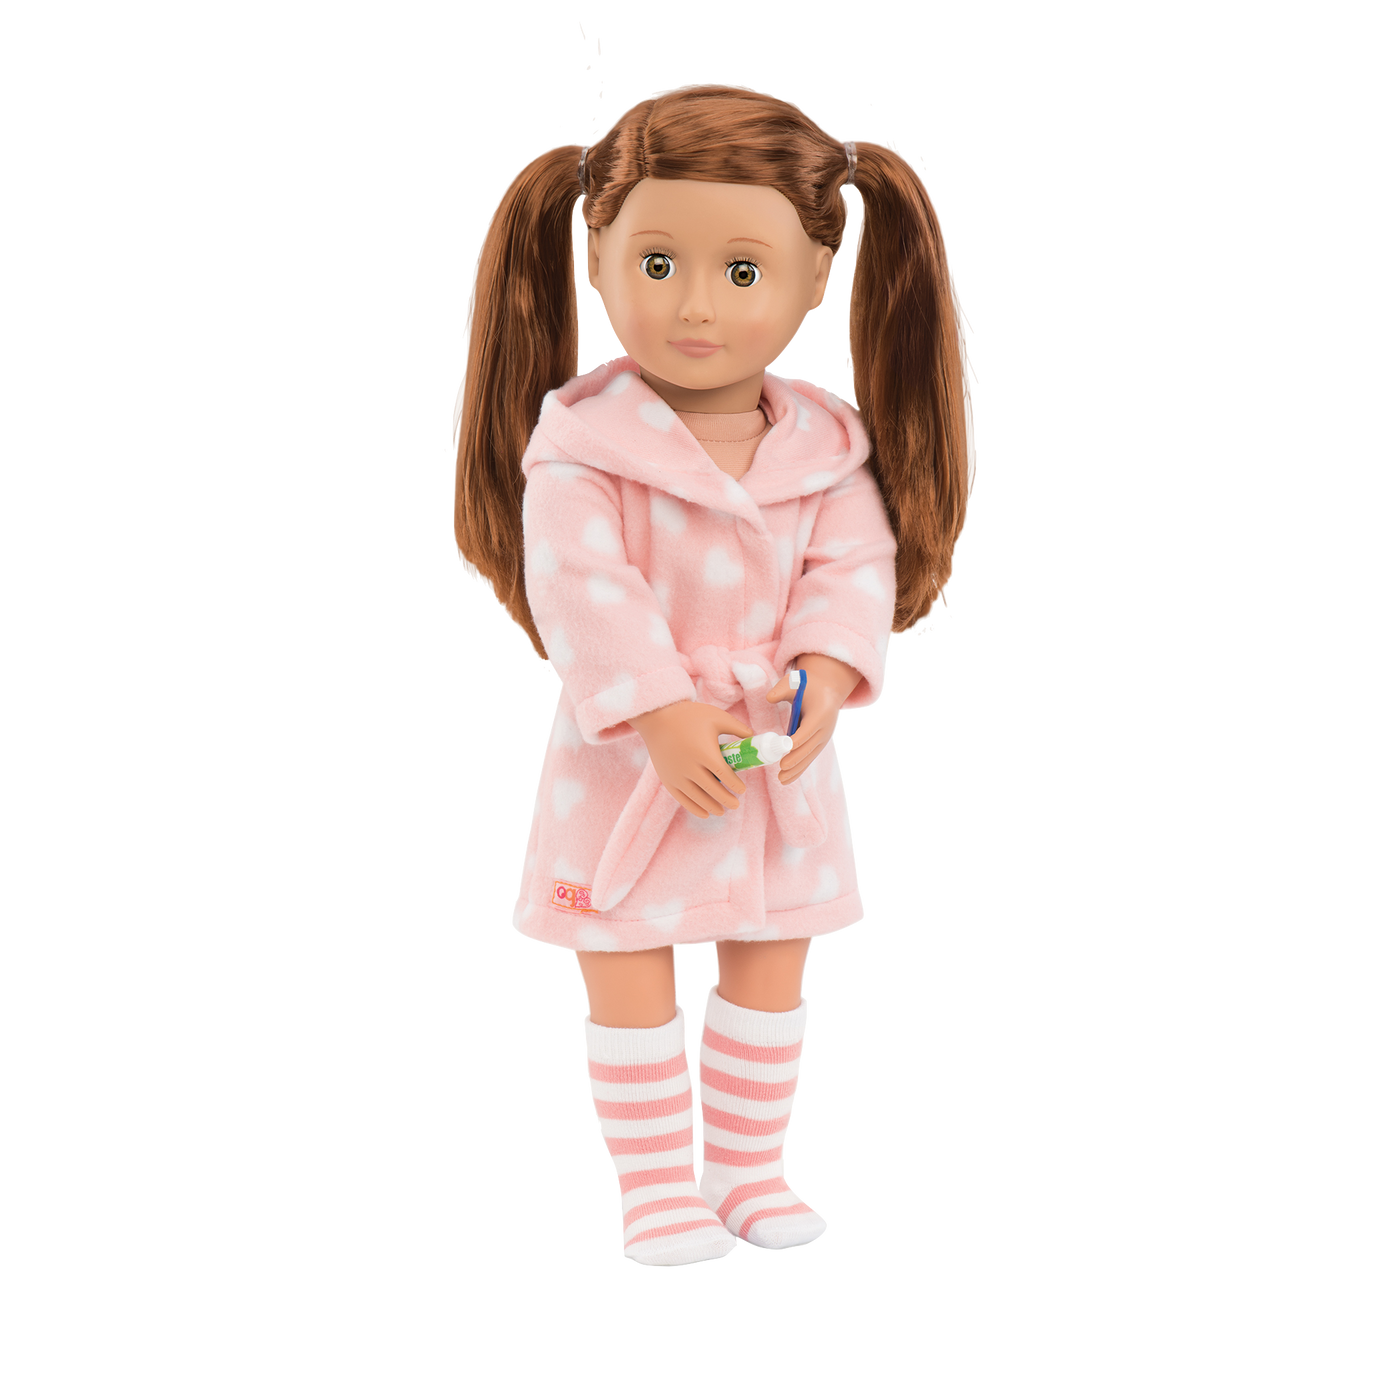 Good Night, Sleep Tight Robe Outfit for 18-inch Dolls